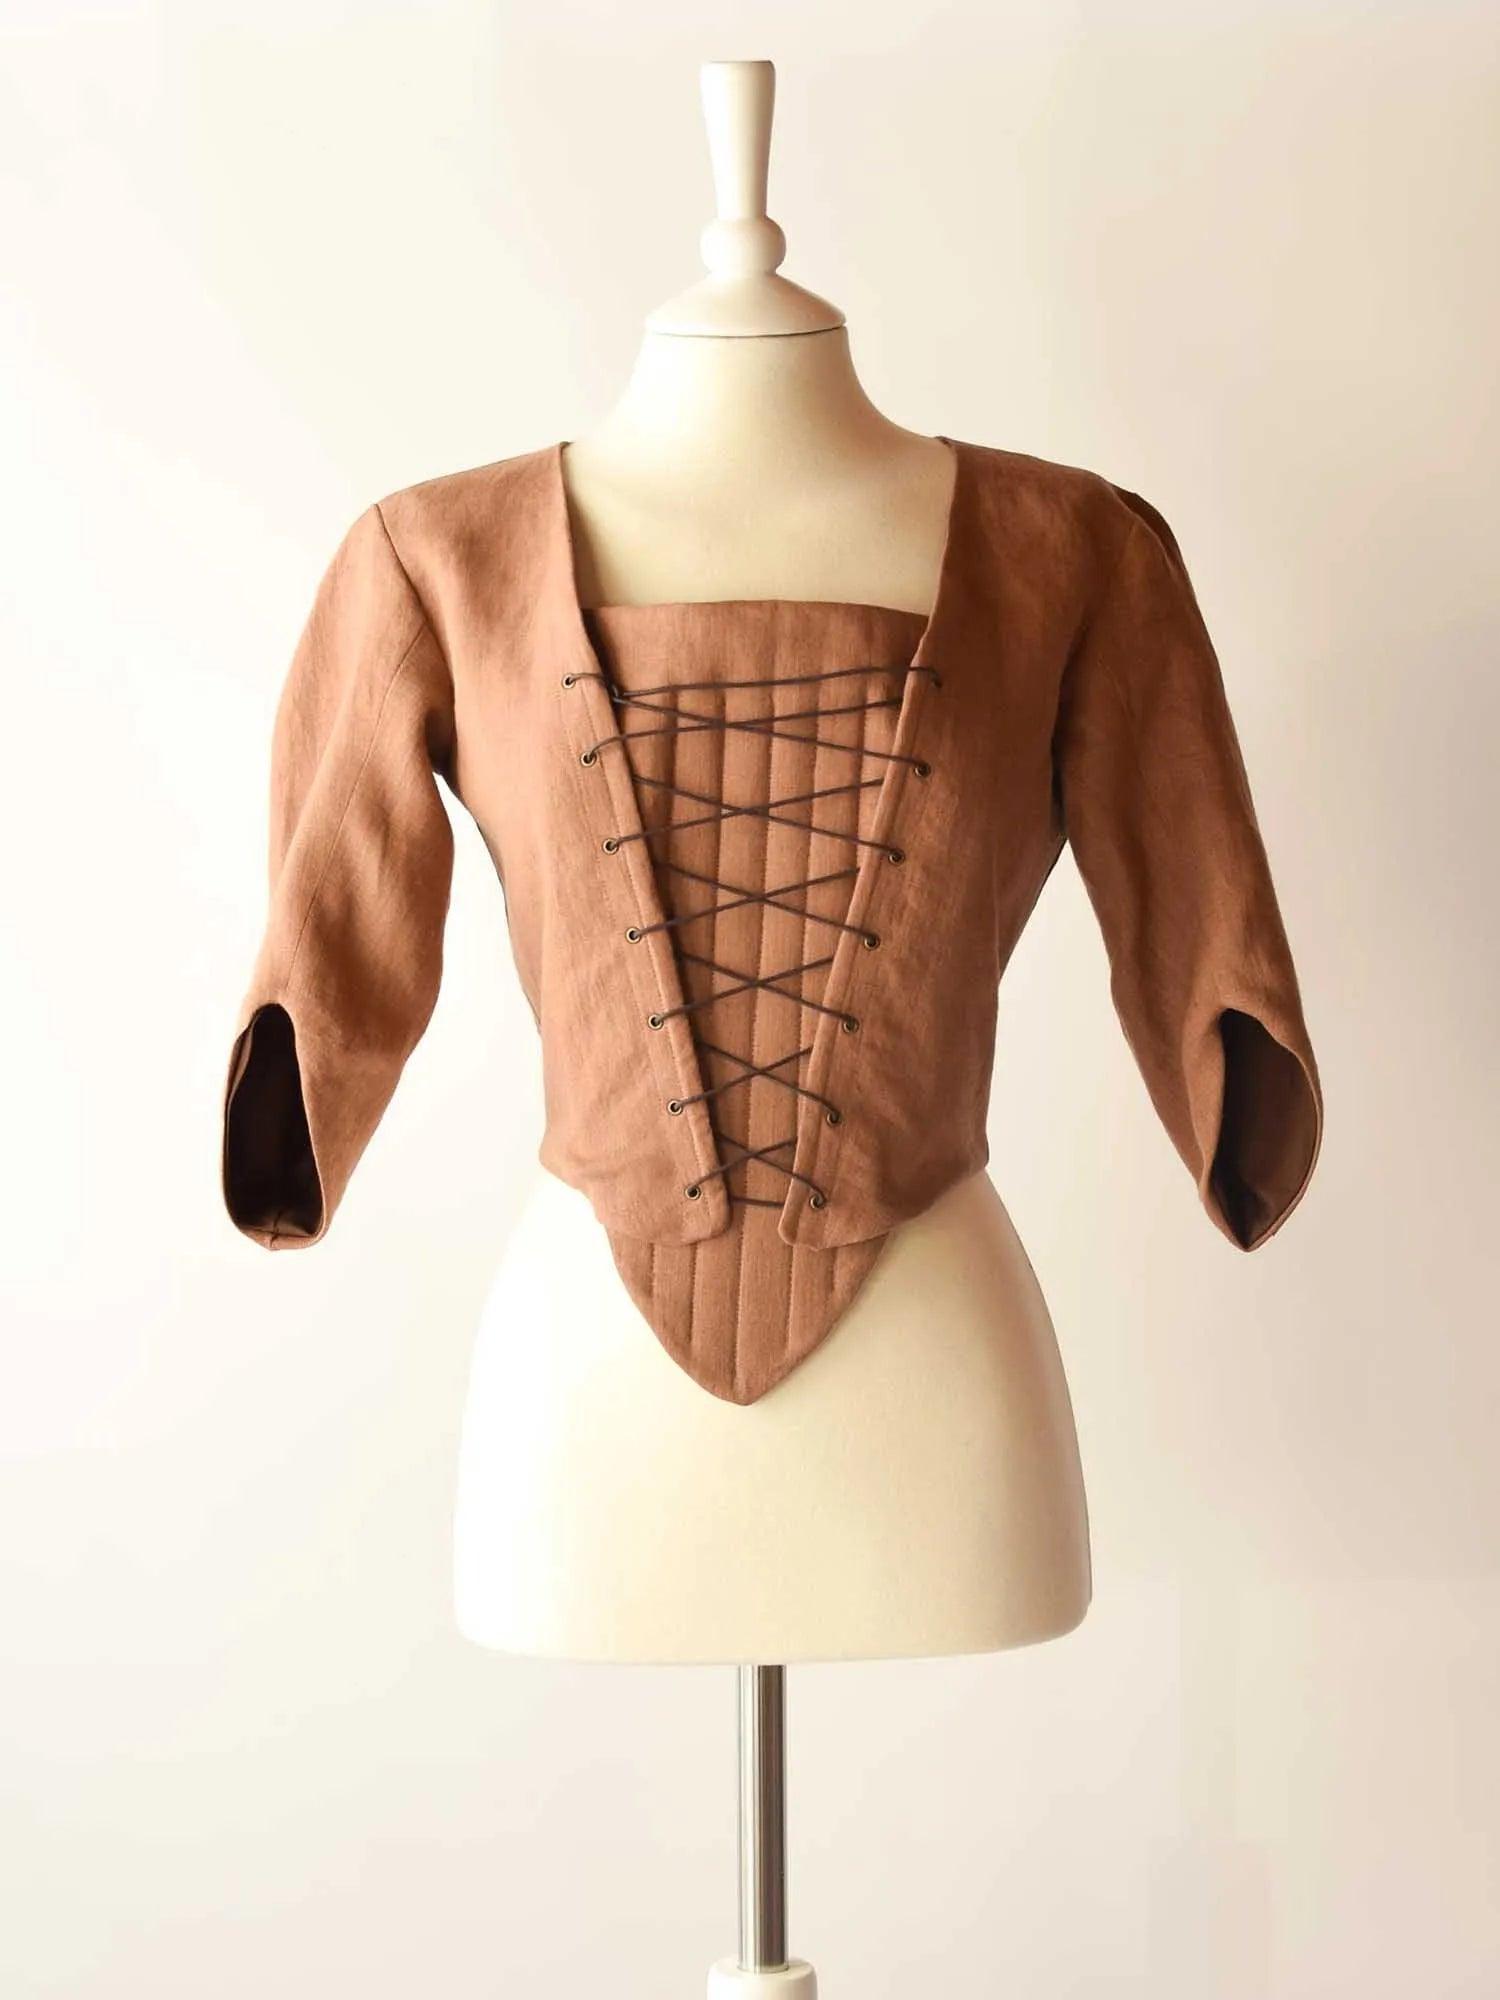 Lace-Up Bodice in Toffee Linen - Atelier Serraspina